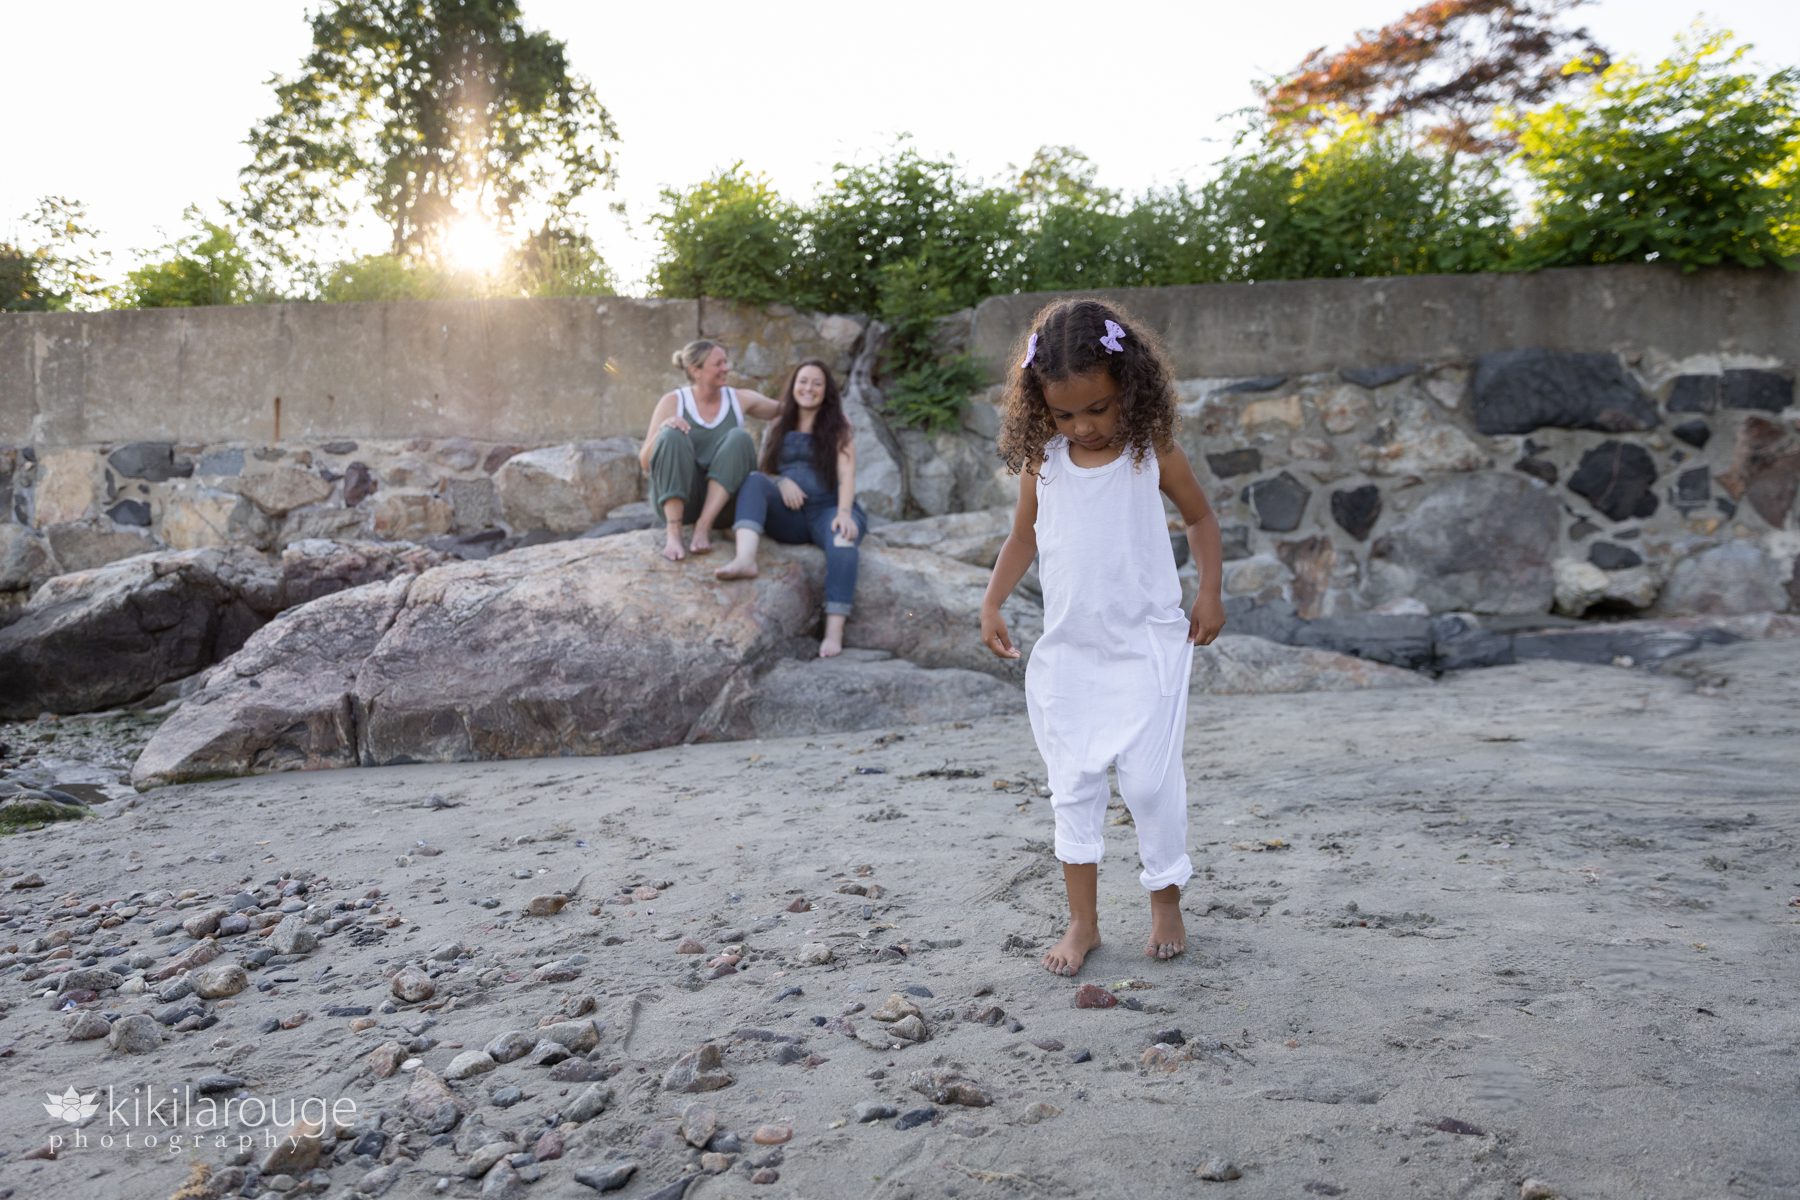 Cute little girl in white jumper looking down with parents sitting on rock at beach in backdrop